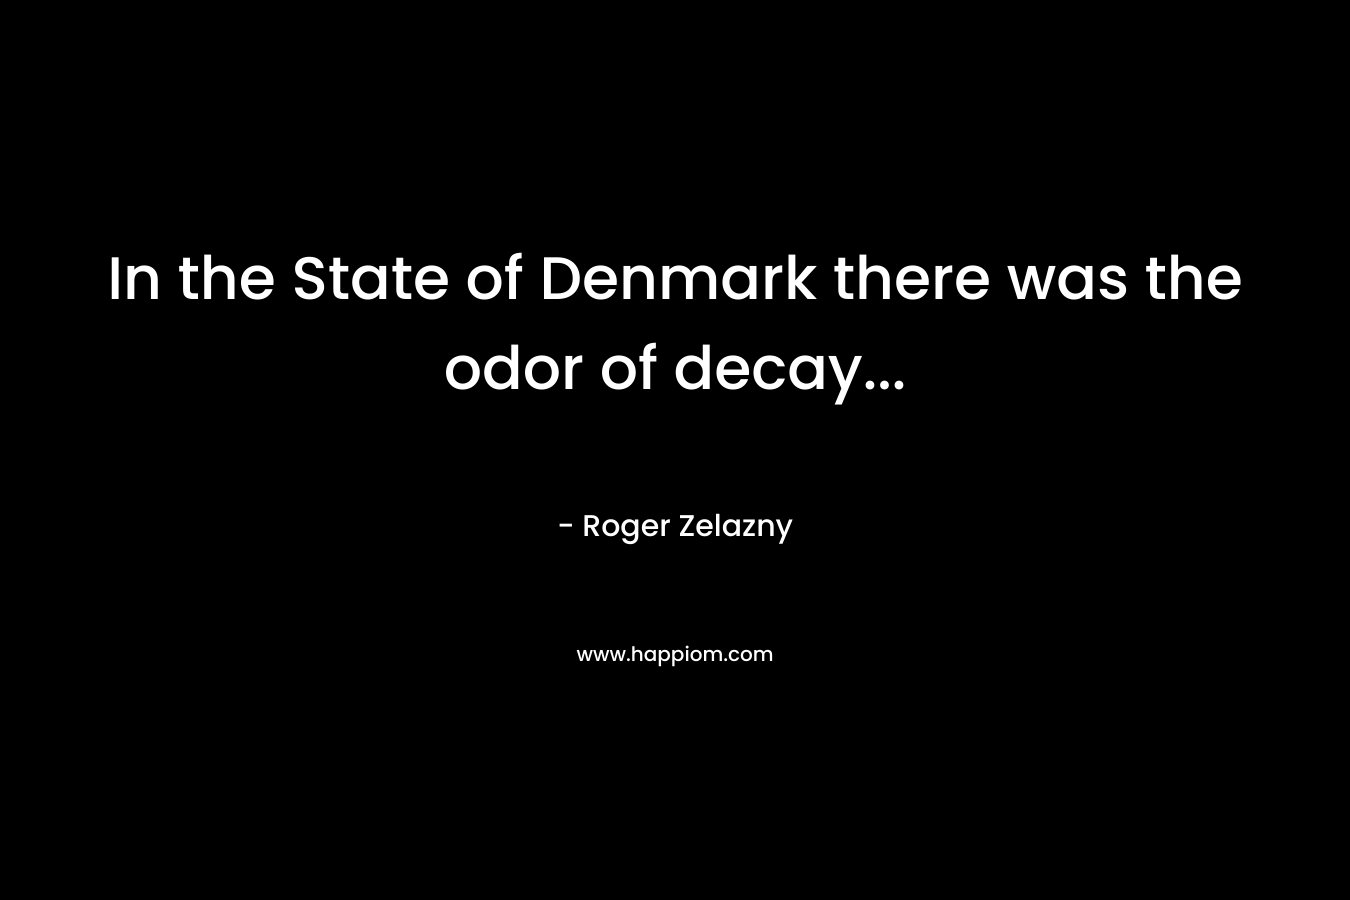 In the State of Denmark there was the odor of decay...